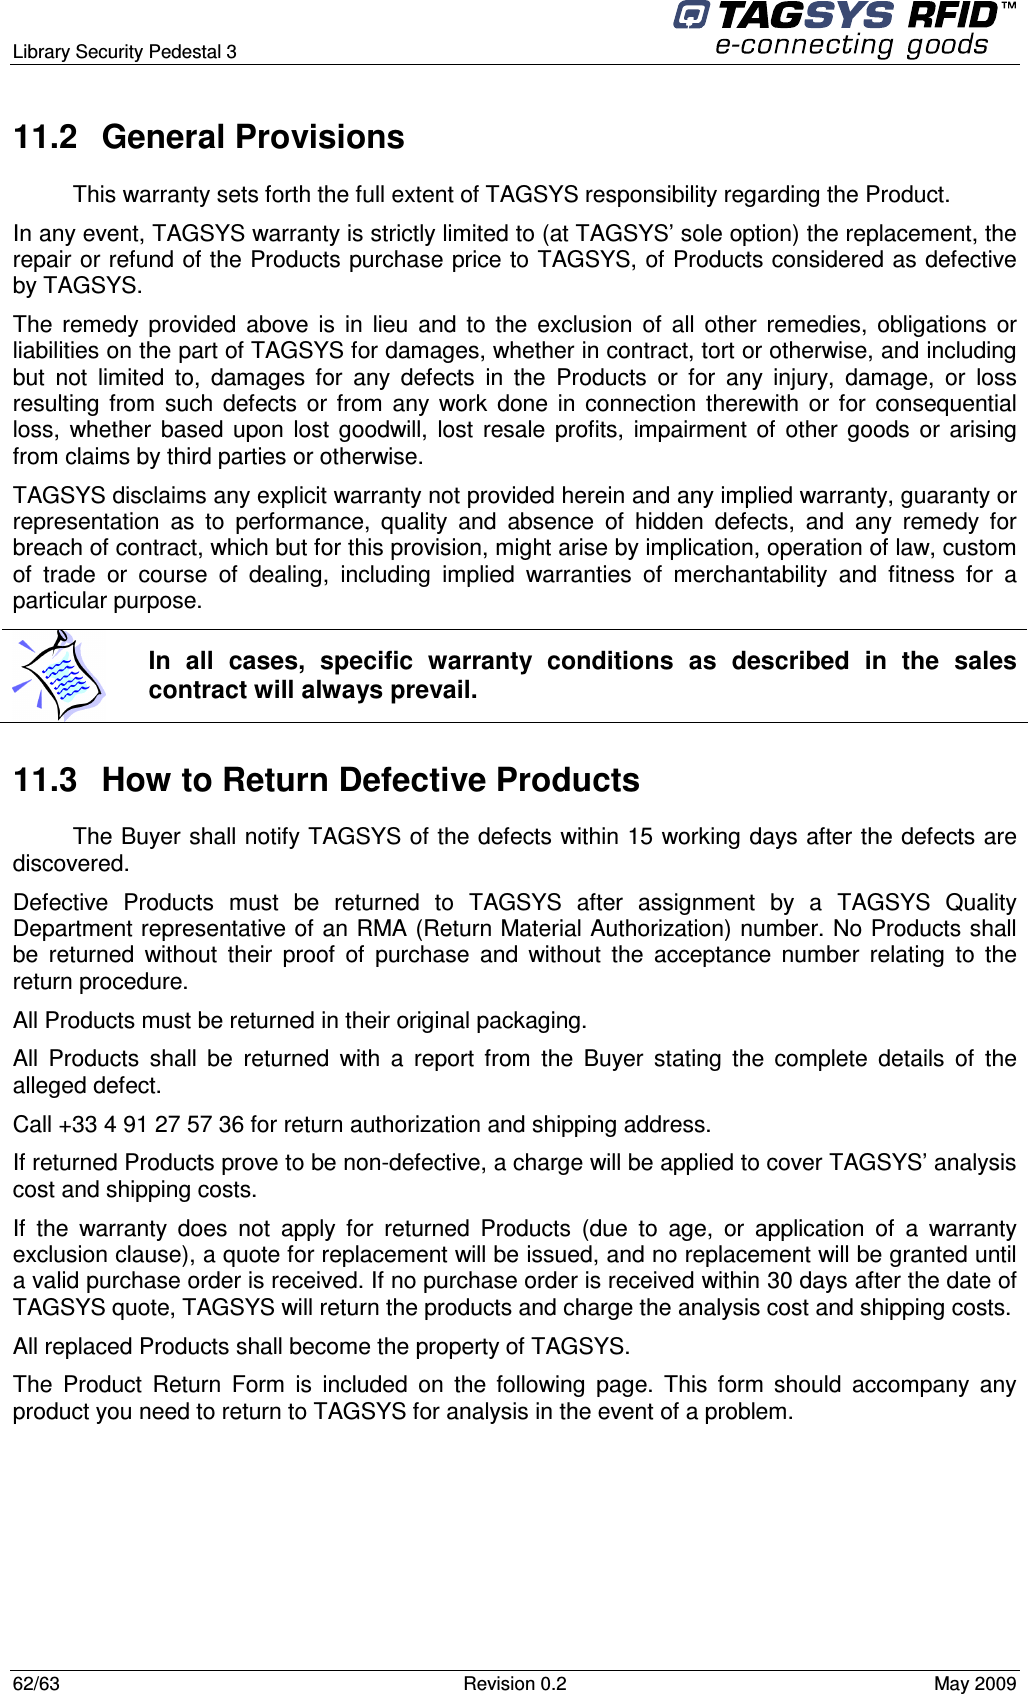  Library Security Pedestal 3   62/63  Revision 0.2  May 2009 11.2  General Provisions This warranty sets forth the full extent of TAGSYS responsibility regarding the Product. In any event, TAGSYS warranty is strictly limited to (at TAGSYS’ sole option) the replacement, the repair or refund of the Products purchase price to TAGSYS, of Products considered as defective by TAGSYS. The  remedy  provided  above  is  in  lieu  and  to  the  exclusion  of  all  other  remedies,  obligations  or liabilities on the part of TAGSYS for damages, whether in contract, tort or otherwise, and including but  not  limited  to,  damages  for  any  defects  in  the  Products  or  for  any  injury,  damage,  or  loss resulting  from  such  defects  or  from  any  work  done  in  connection  therewith  or  for  consequential loss,  whether  based  upon  lost  goodwill,  lost  resale  profits,  impairment  of  other  goods  or  arising from claims by third parties or otherwise. TAGSYS disclaims any explicit warranty not provided herein and any implied warranty, guaranty or representation  as  to  performance,  quality  and  absence  of  hidden  defects,  and  any  remedy  for breach of contract, which but for this provision, might arise by implication, operation of law, custom of  trade  or  course  of  dealing,  including  implied  warranties  of  merchantability  and  fitness  for  a particular purpose. 11.3  How to Return Defective Products The Buyer shall notify TAGSYS of the defects within 15 working days after the defects are discovered. Defective  Products  must  be  returned  to  TAGSYS  after  assignment  by  a  TAGSYS  Quality Department representative of an RMA (Return Material Authorization) number. No Products shall be  returned  without  their  proof  of  purchase  and  without  the  acceptance  number  relating  to  the return procedure. All Products must be returned in their original packaging. All  Products  shall  be  returned  with  a  report  from  the  Buyer  stating  the  complete  details  of  the alleged defect. Call +33 4 91 27 57 36 for return authorization and shipping address. If returned Products prove to be non-defective, a charge will be applied to cover TAGSYS’ analysis cost and shipping costs. If  the  warranty  does  not  apply  for  returned  Products  (due  to  age,  or  application  of  a  warranty exclusion clause), a quote for replacement will be issued, and no replacement will be granted until a valid purchase order is received. If no purchase order is received within 30 days after the date of TAGSYS quote, TAGSYS will return the products and charge the analysis cost and shipping costs. All replaced Products shall become the property of TAGSYS. The  Product  Return  Form  is  included  on  the  following  page.  This  form  should  accompany  any product you need to return to TAGSYS for analysis in the event of a problem.      In  all  cases,  specific  warranty  conditions  as  described  in  the  sales contract will always prevail. 